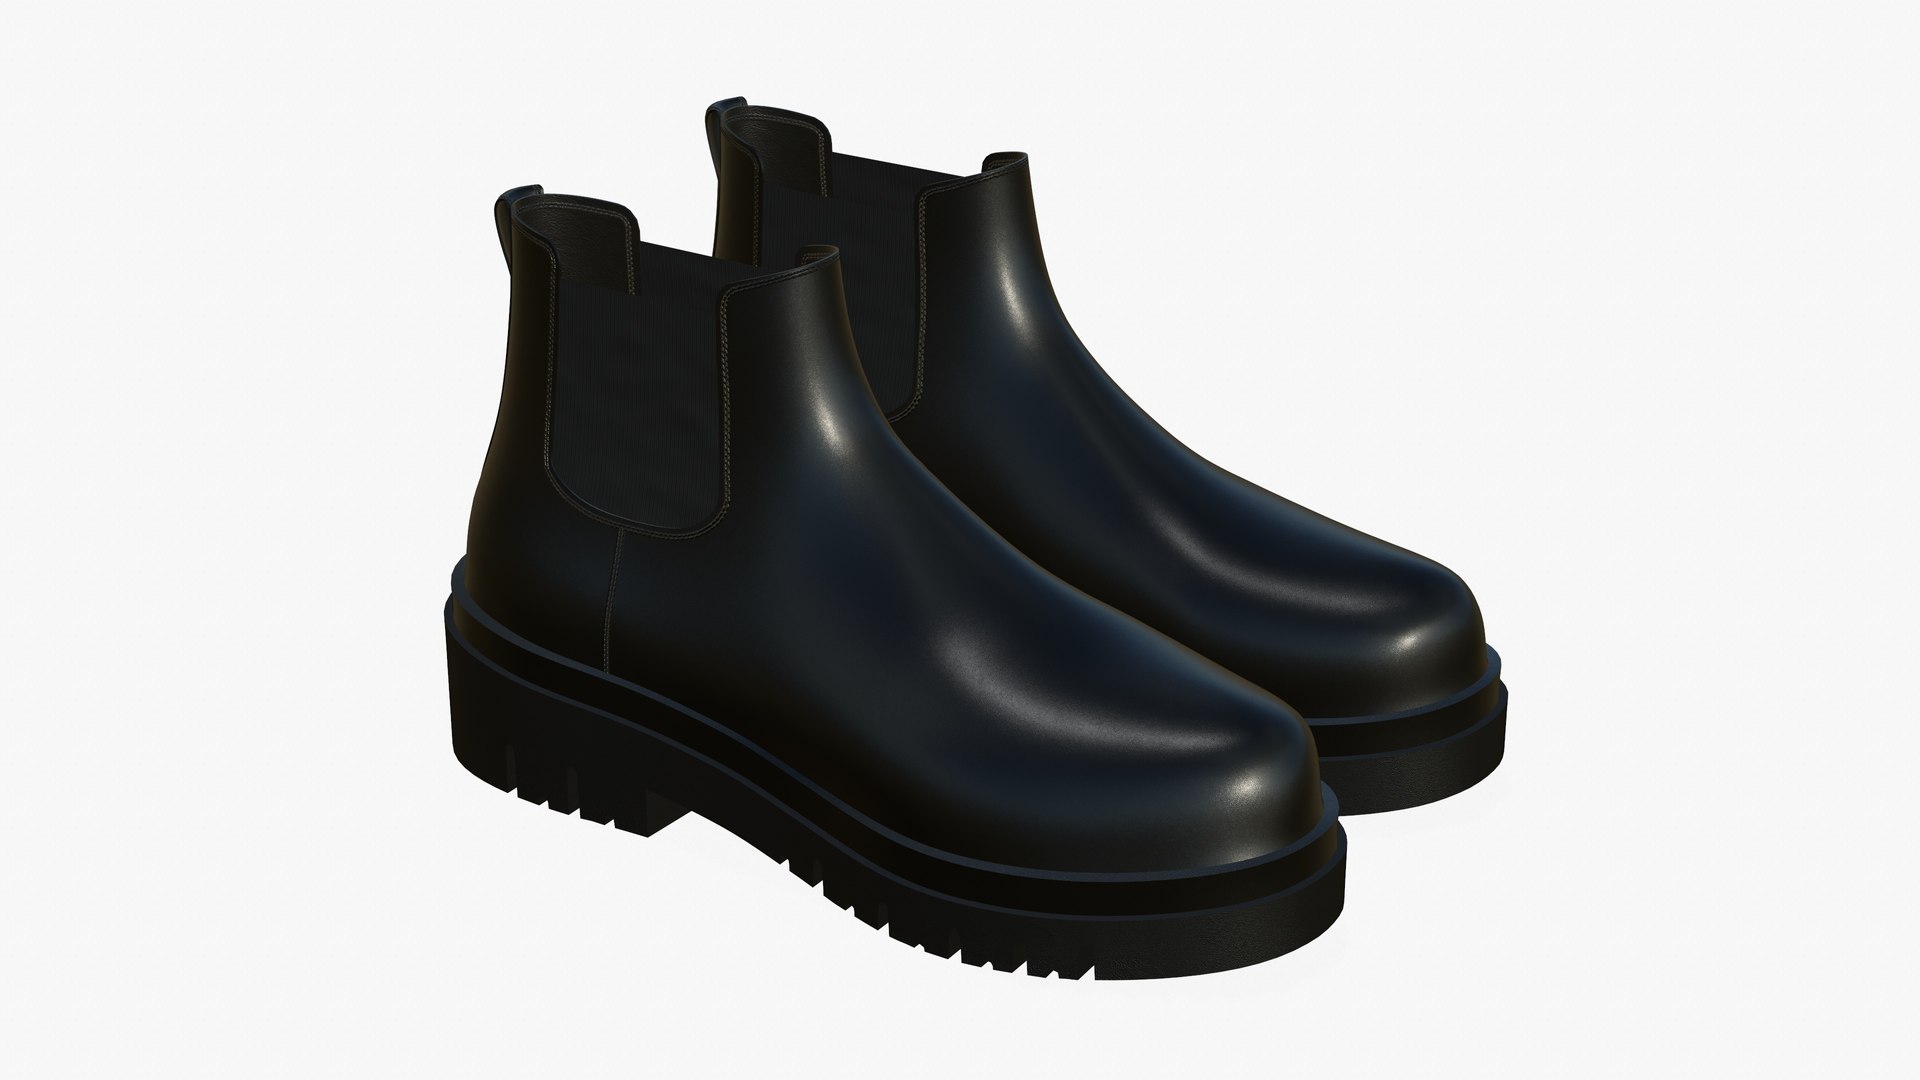 Realistic Leather Boots V38 3D model - TurboSquid 1952976